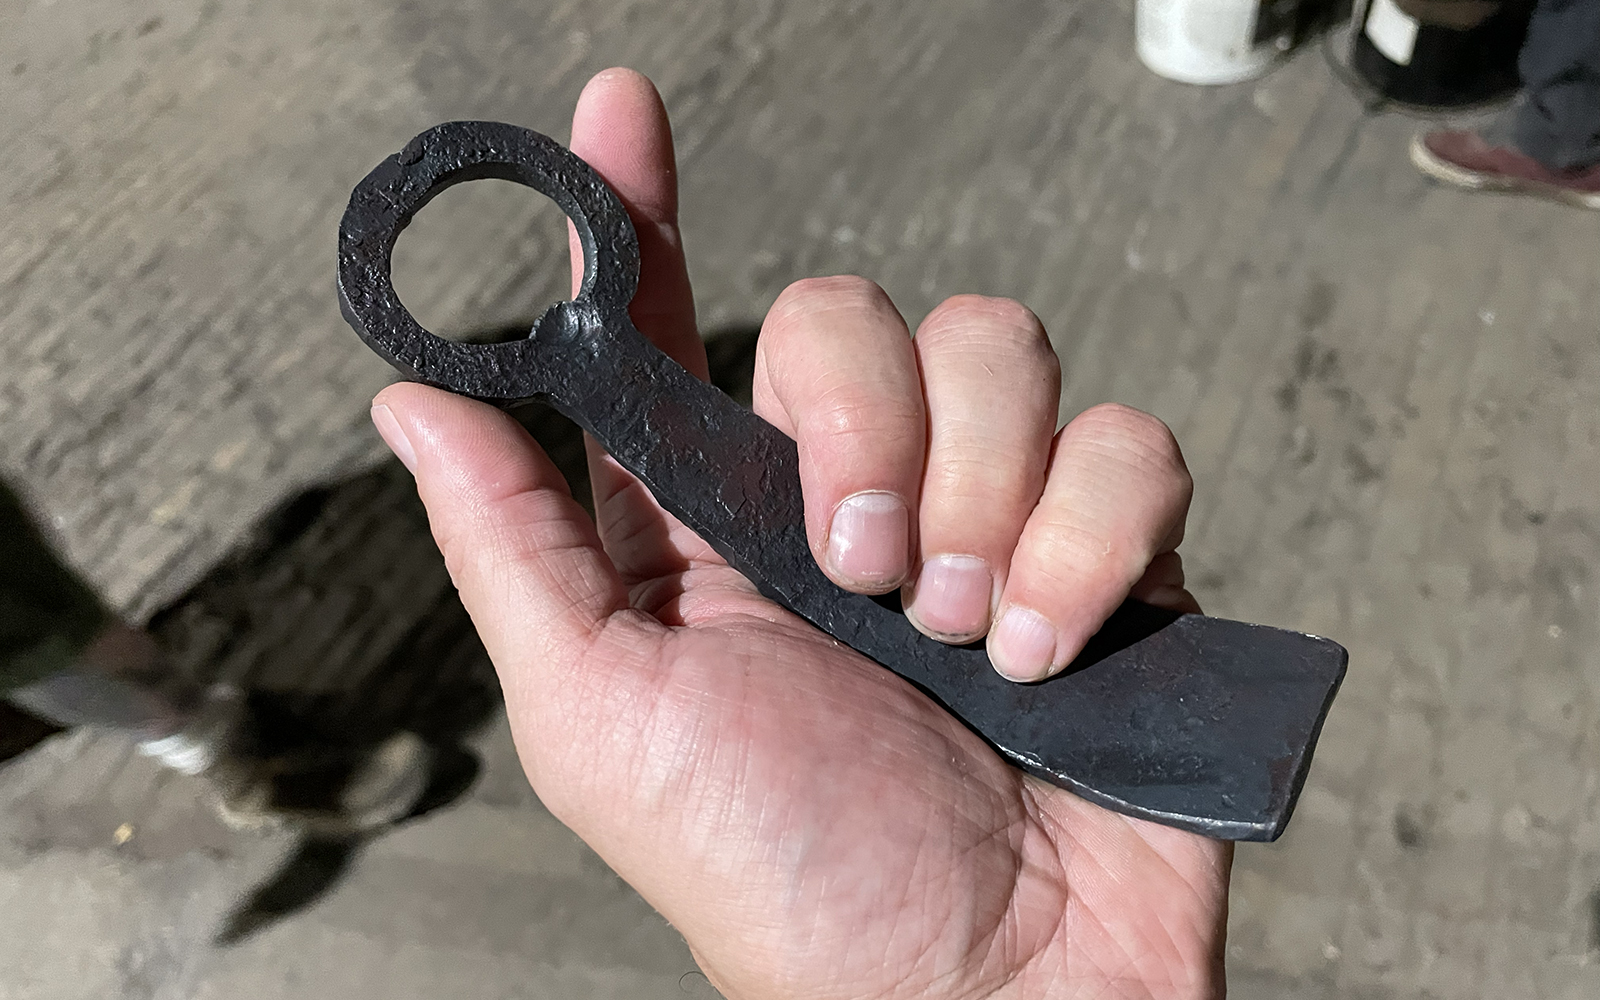 one participant displays their completed bottle opener in their hand